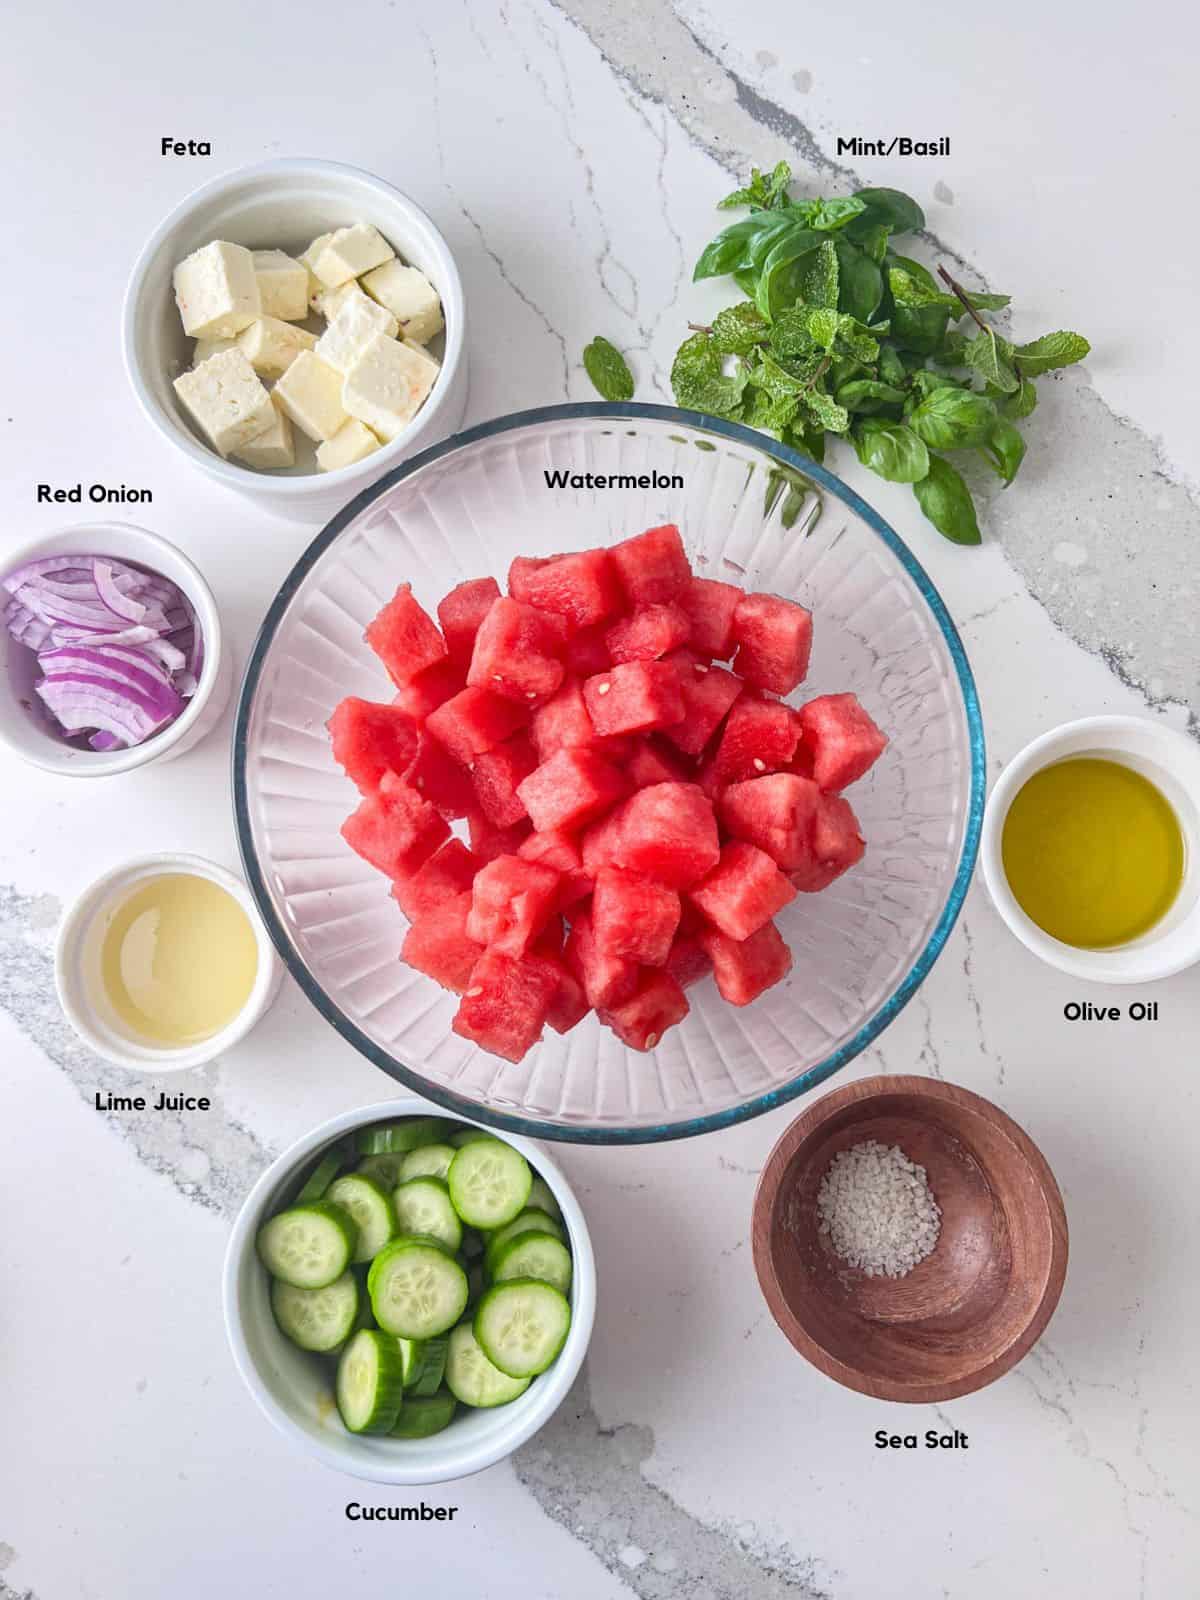 Ingredients to make a watermelon feta salad on table.